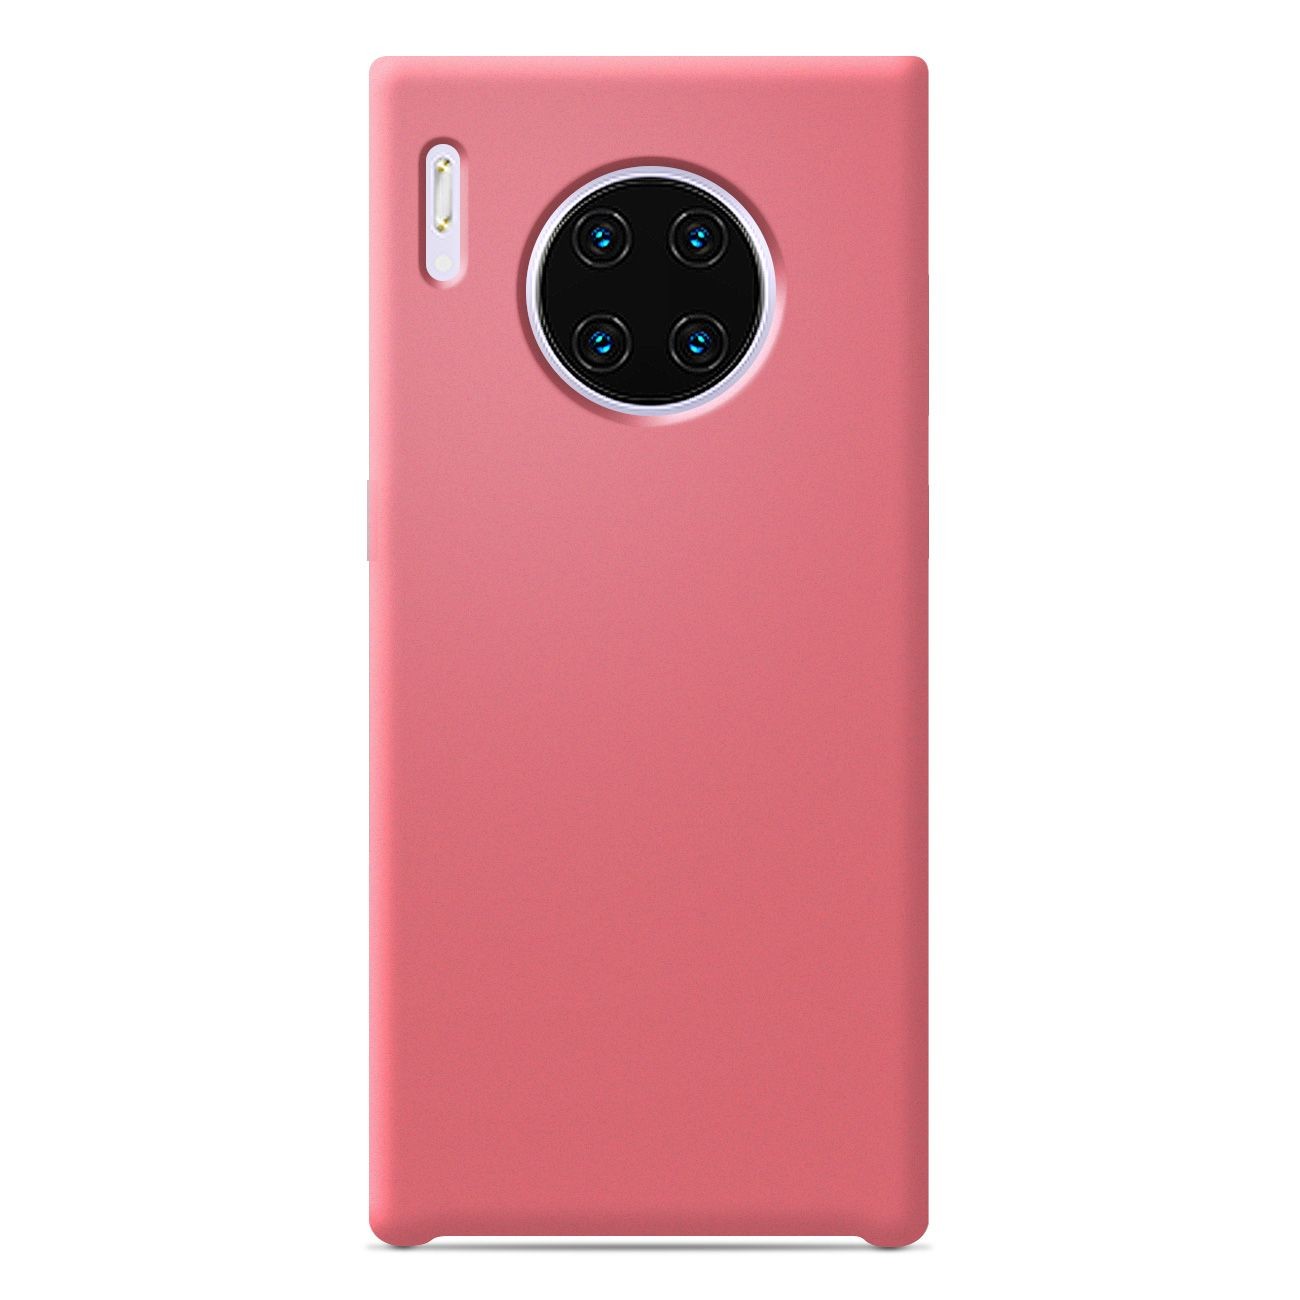 Coque silicone unie Soft Touch Rose compatible Huawei Mate 30 Pro